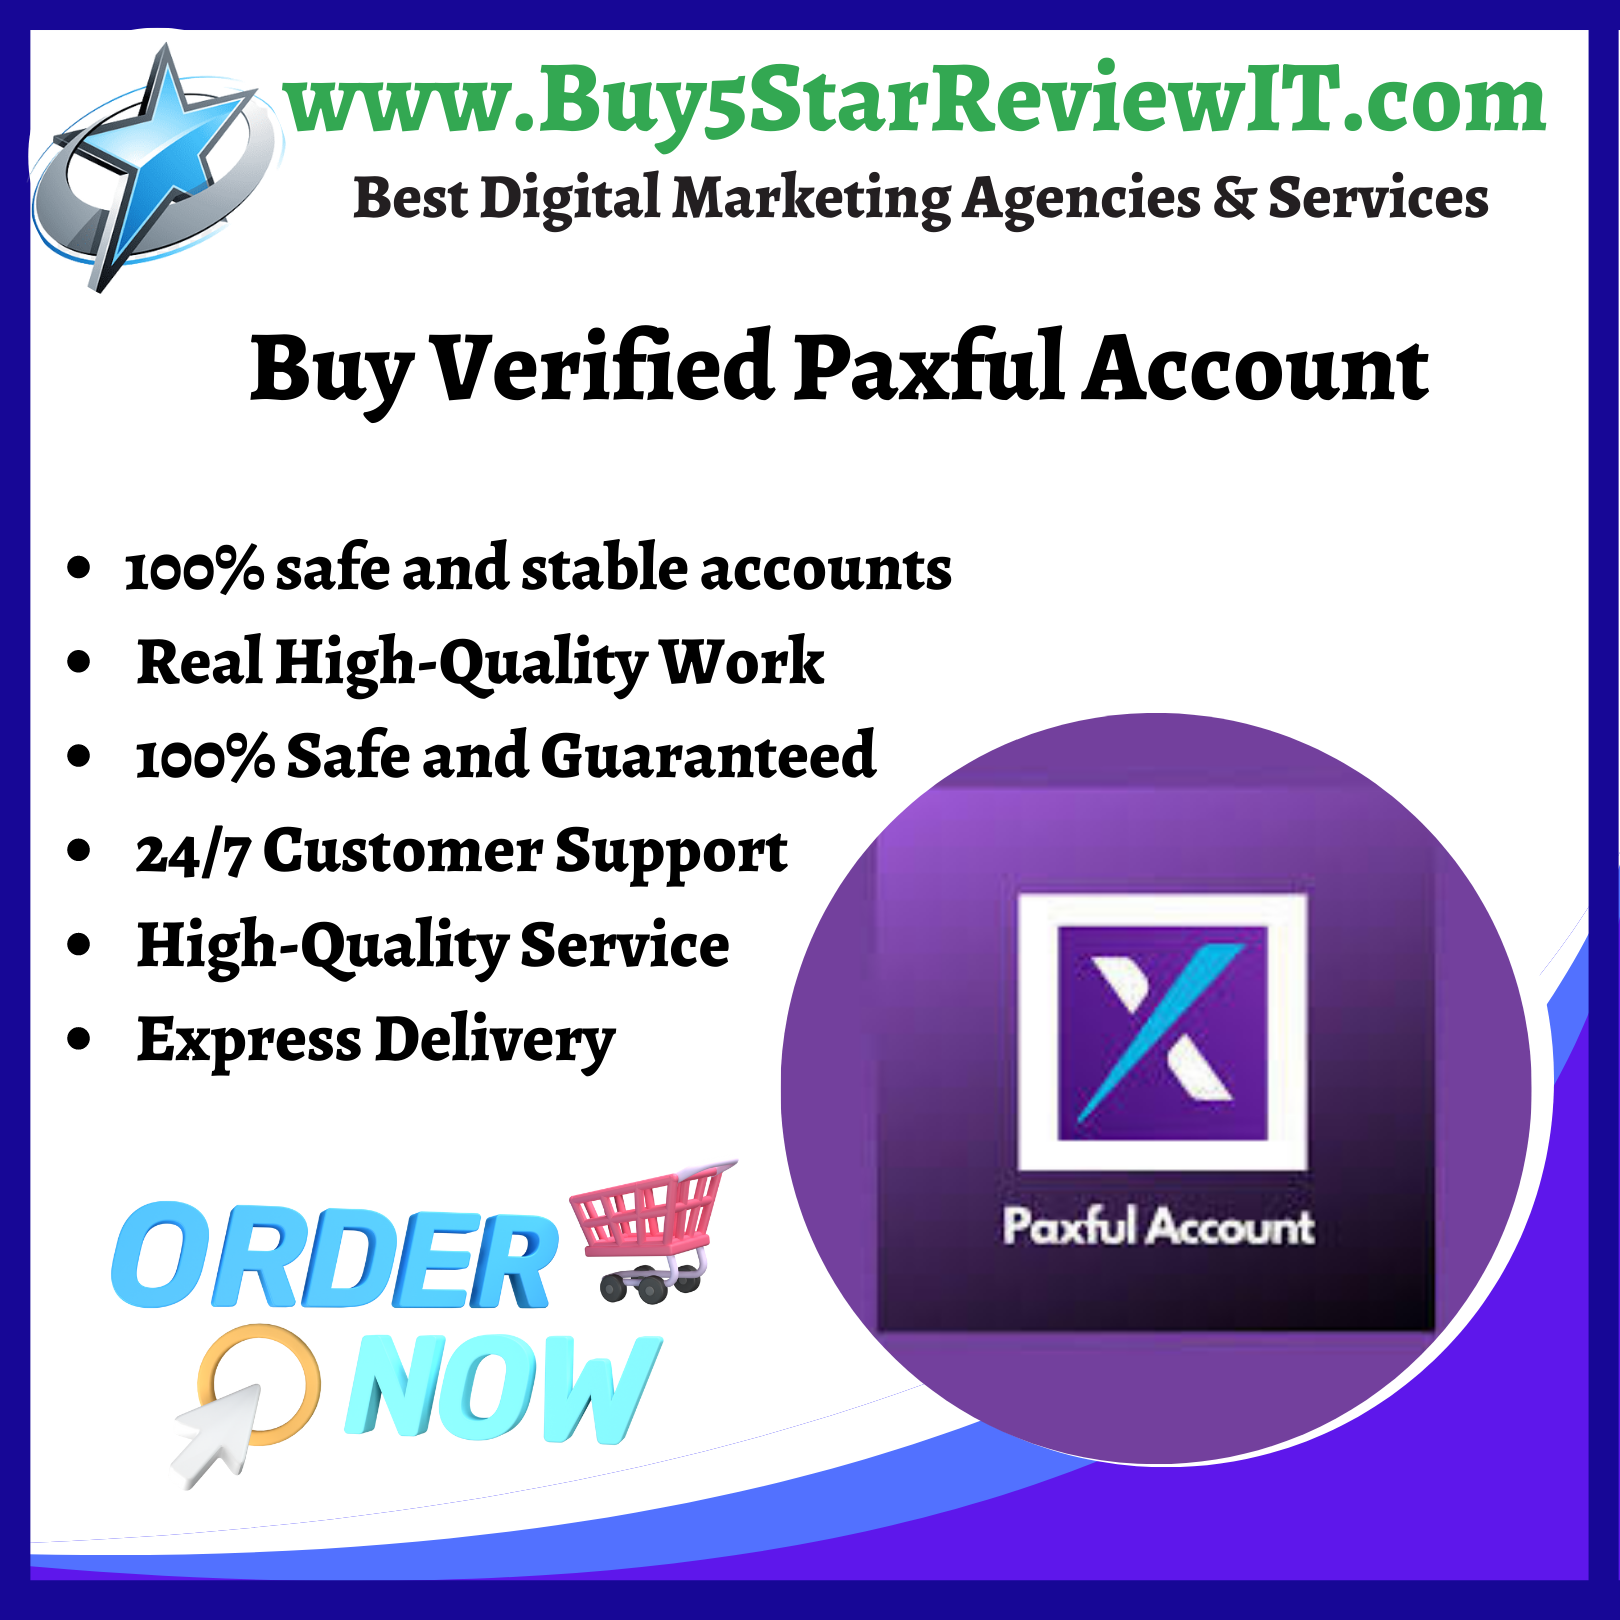 Buy Verified Paxful Account - Buy 5 Star Review IT